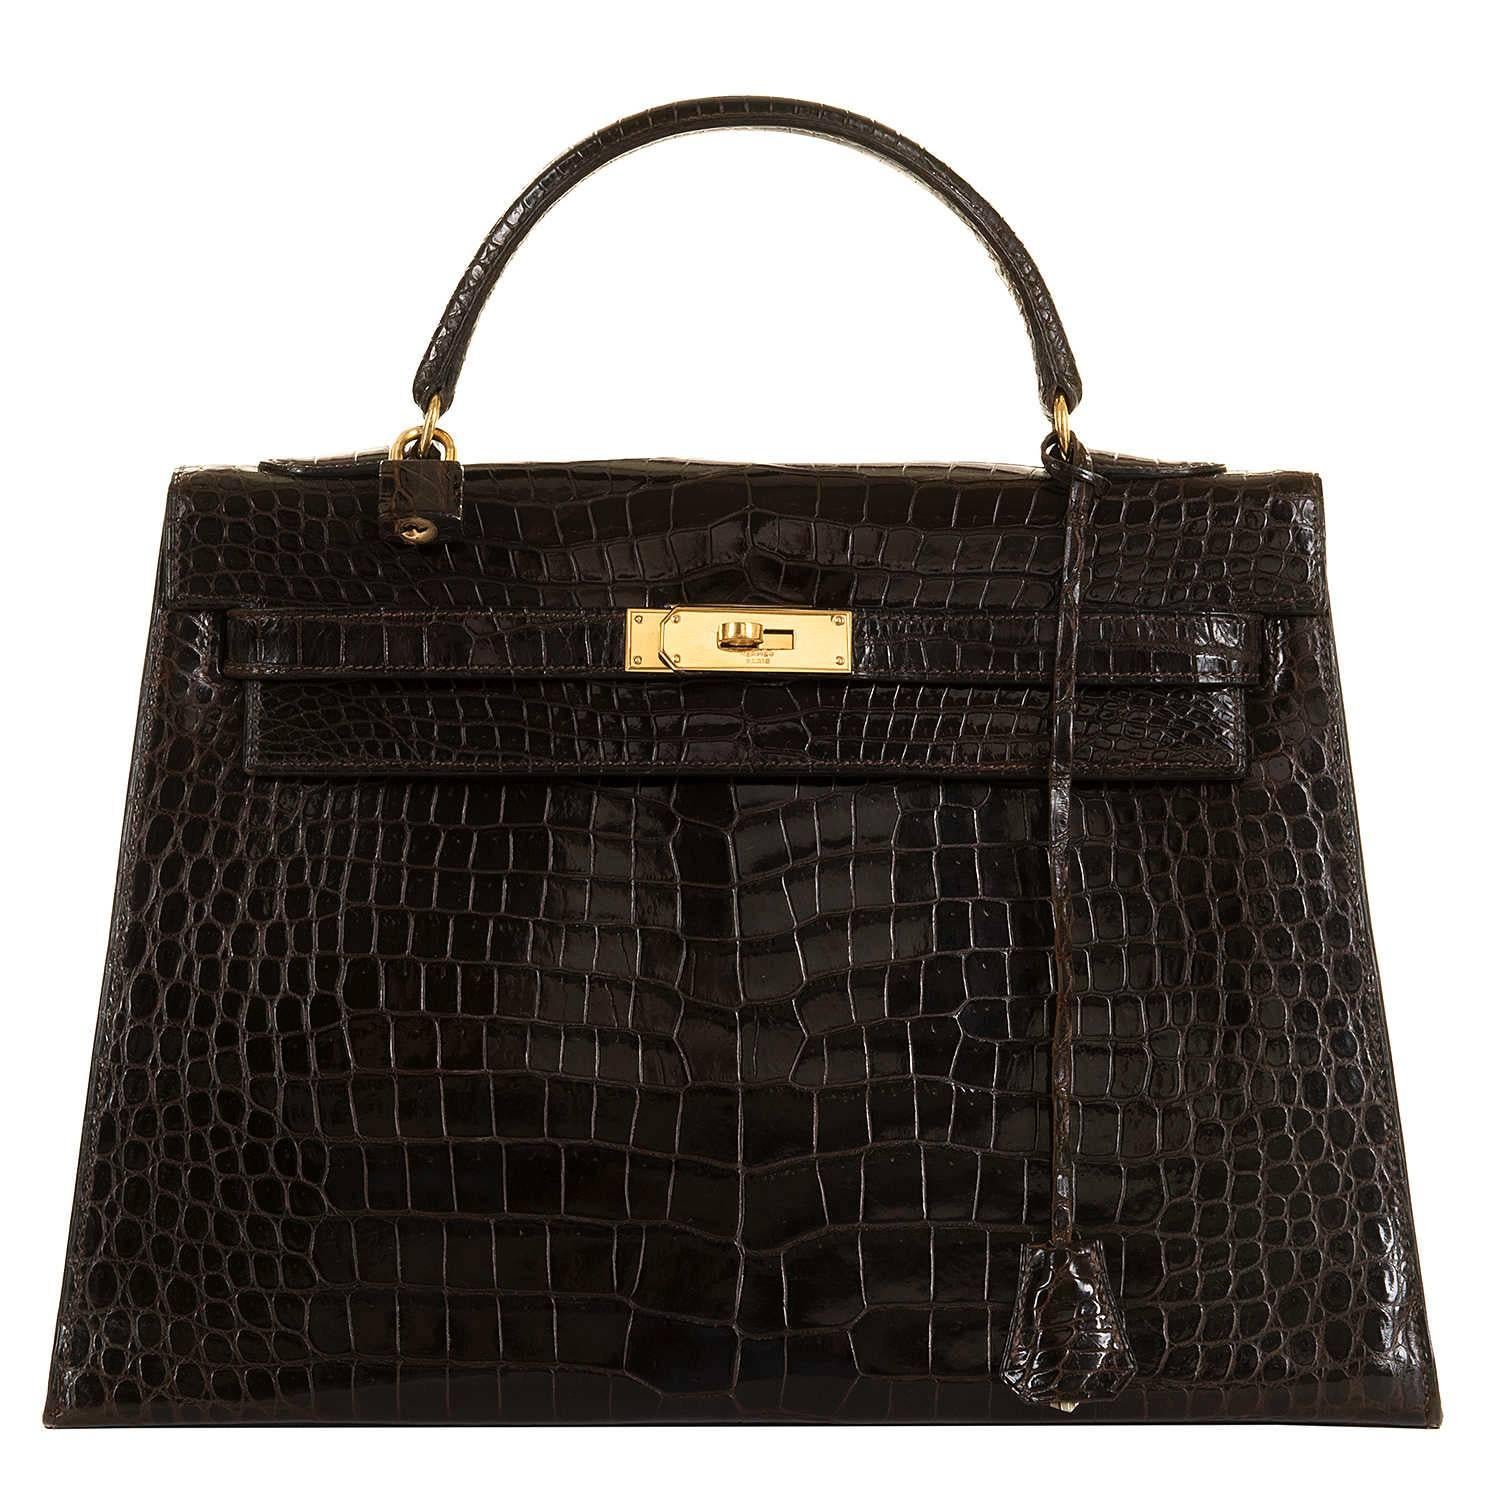 In Pristine condition, this Very Rare Vintage Hermes 'Chocolate' Crocodile Kelly Handbag comes with Goldtone Hardware and a colour-matched interior finished in 'Chèvre' leather. The bag is complete with it's original Crocodile leather covered